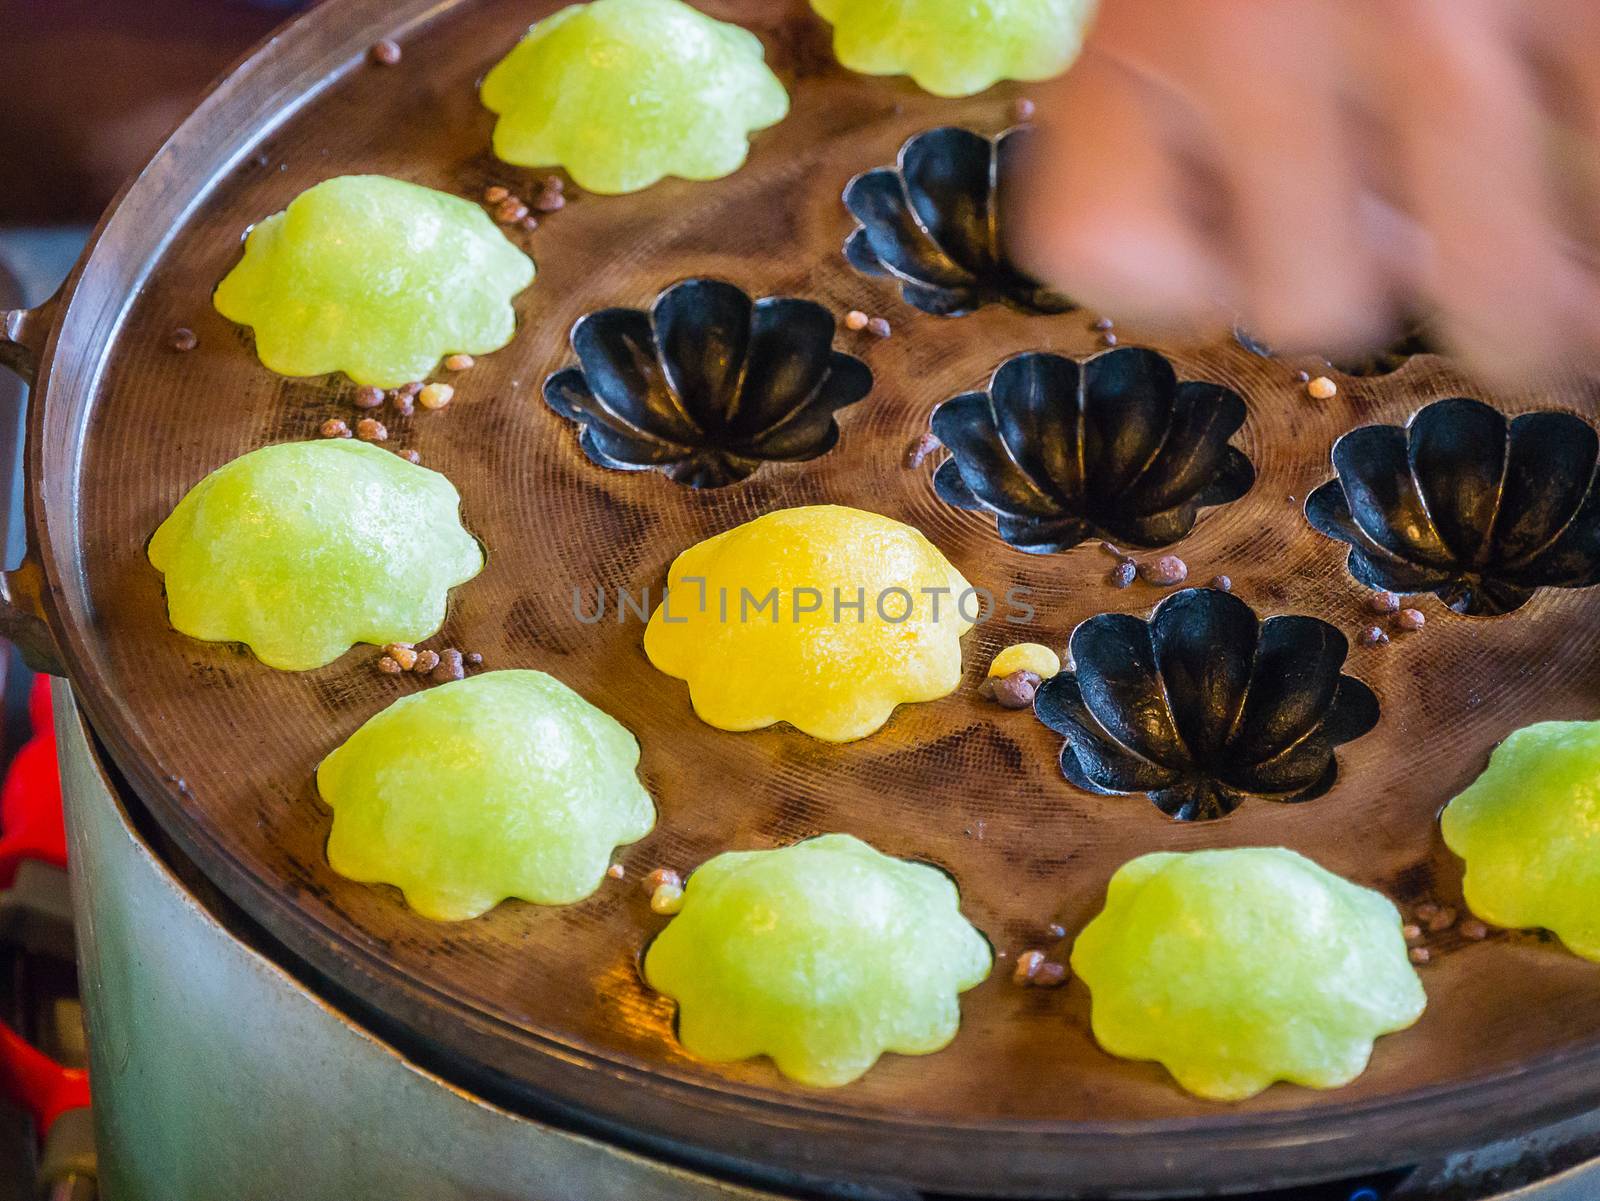 Serabi is a traditional Javanese Panecake made from coconut, brown sugar and rice powder.Usually it's packed with banana leaf.This pic directly taken from the seller at traditional market in Thailand